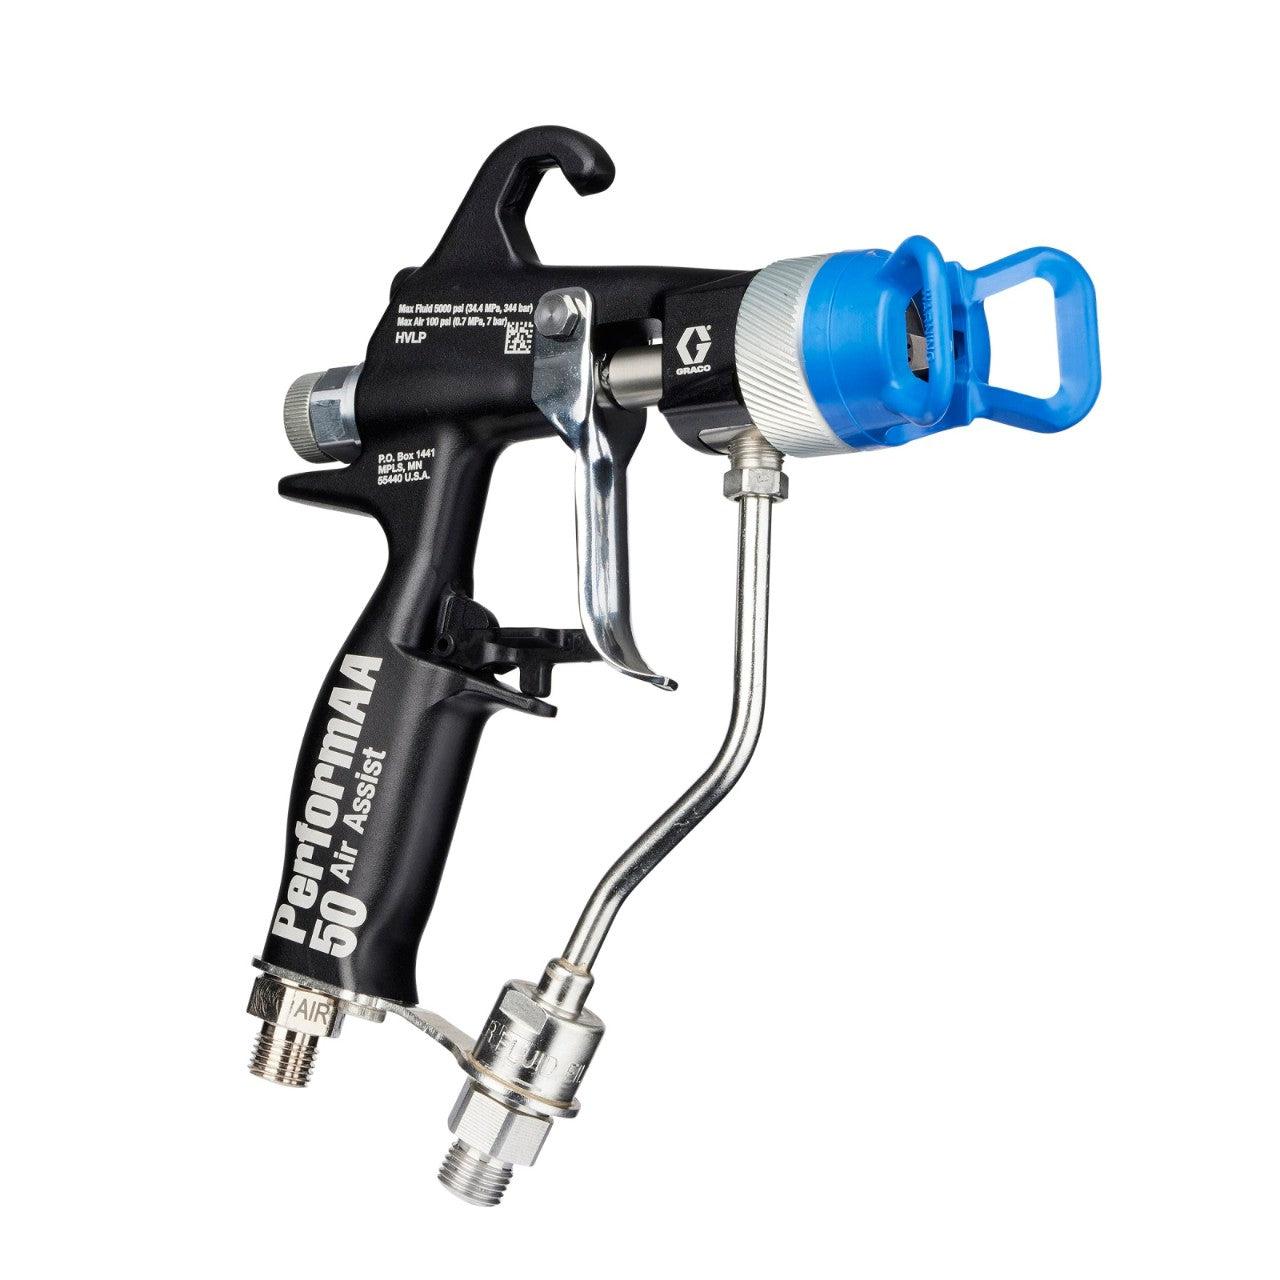 PerformAA 5000 Air Assist Gun with General Finishing air cap and no fluid filter